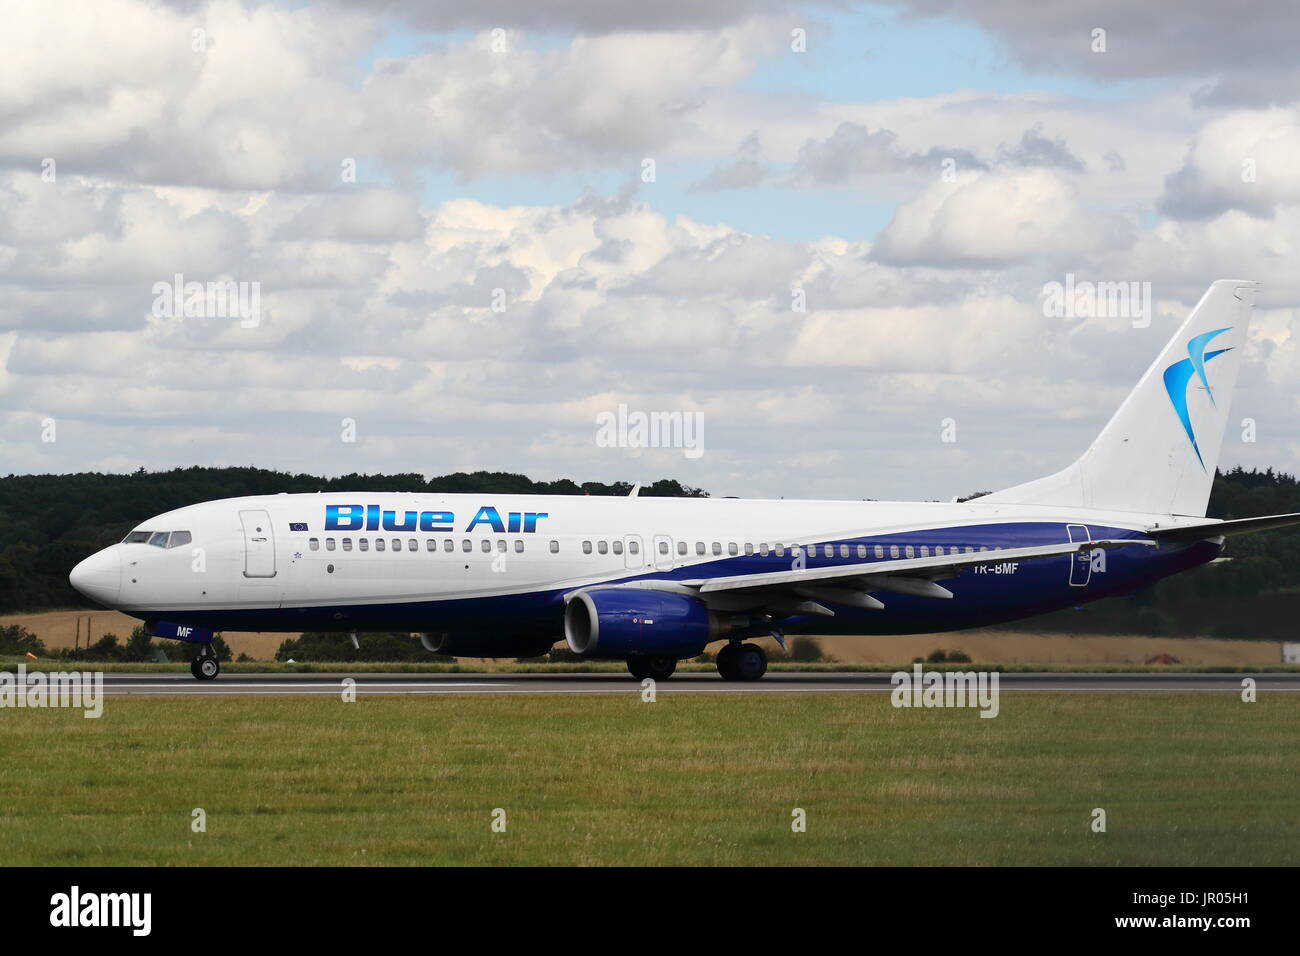 Blue Air Boeing 737-800 YR-BMF taking off from London Luton Airport, UK Stock Photo